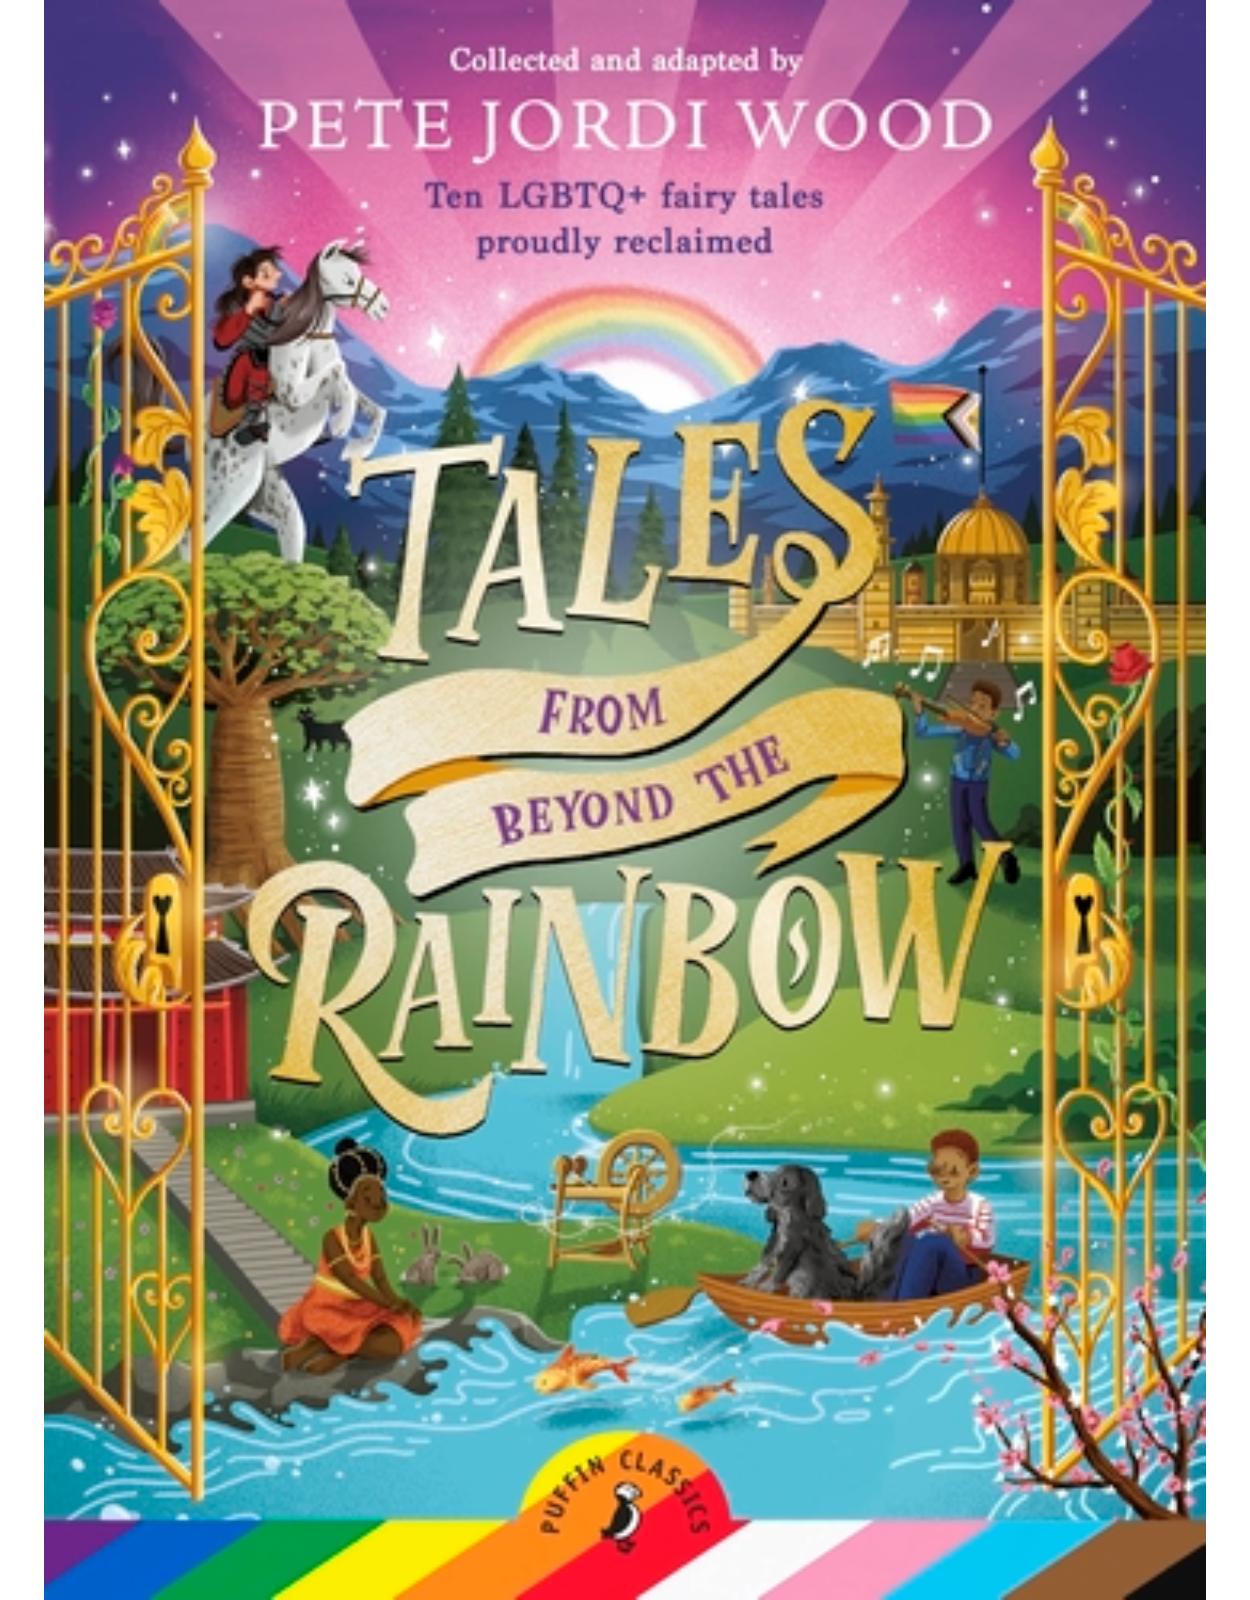 Tales From Beyond the Rainbow